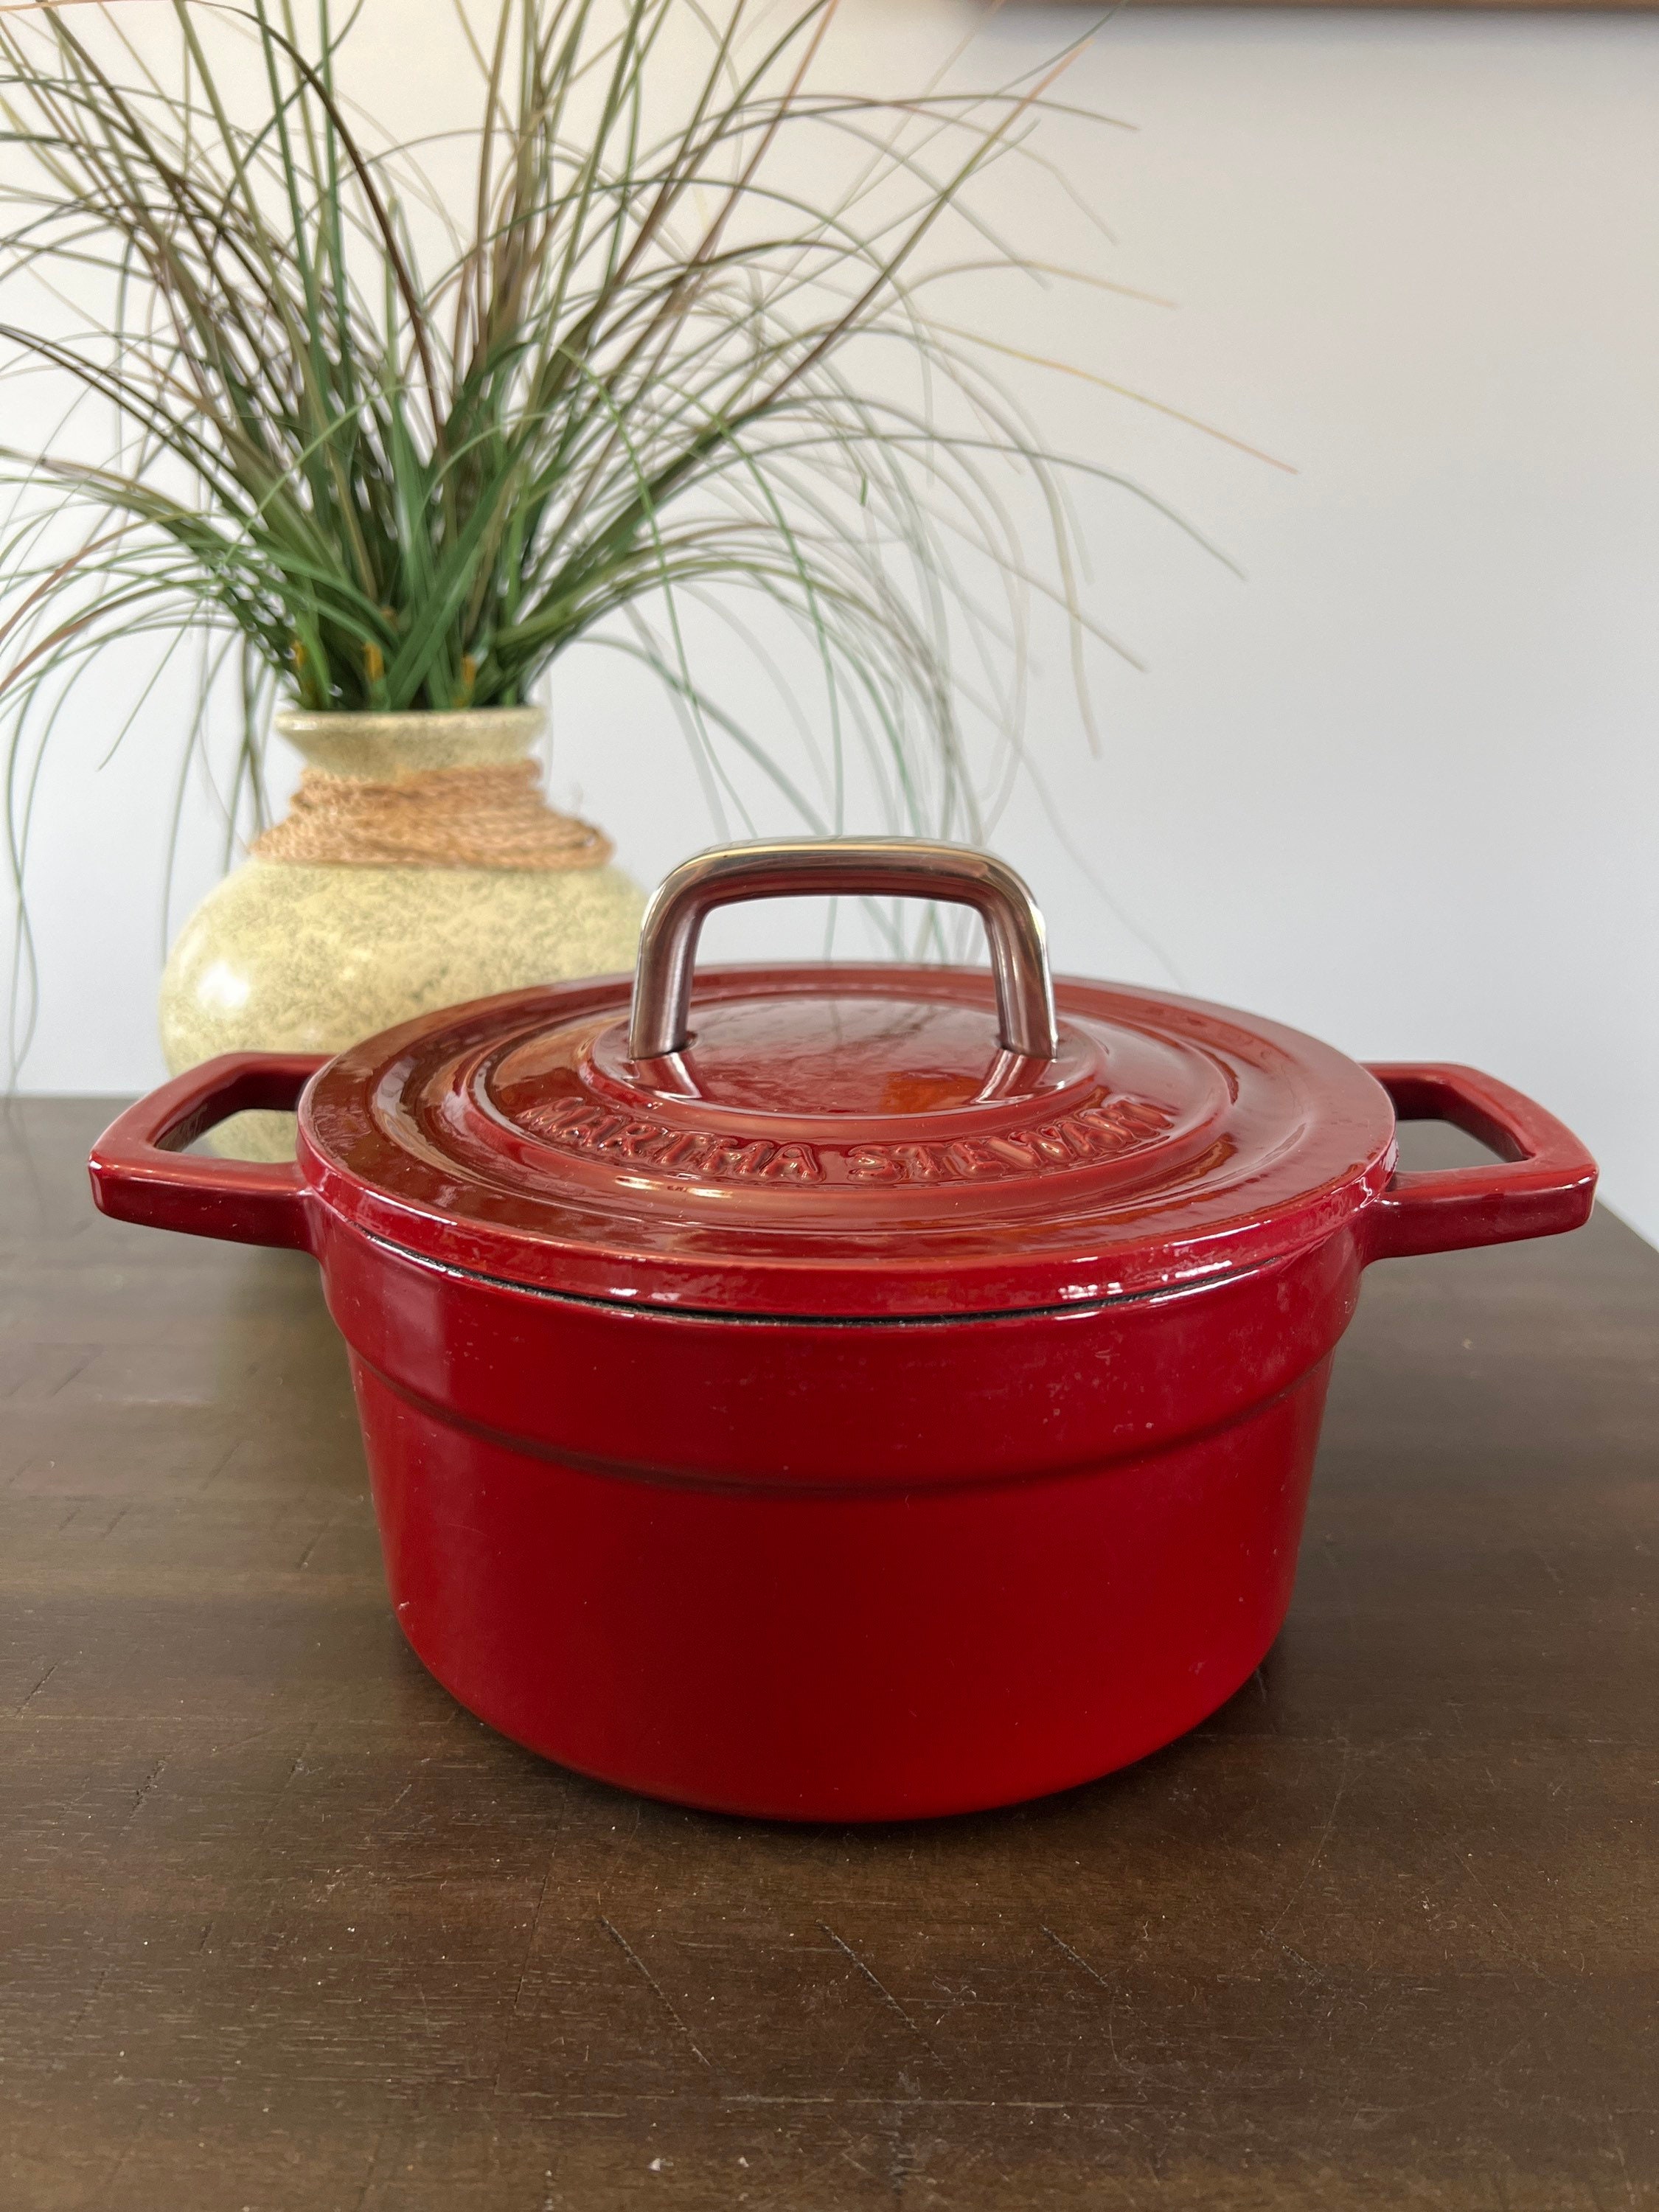 Martha Stewart 5 Quart Enameled Cast Iron Round Dutch Oven in Red with Lid